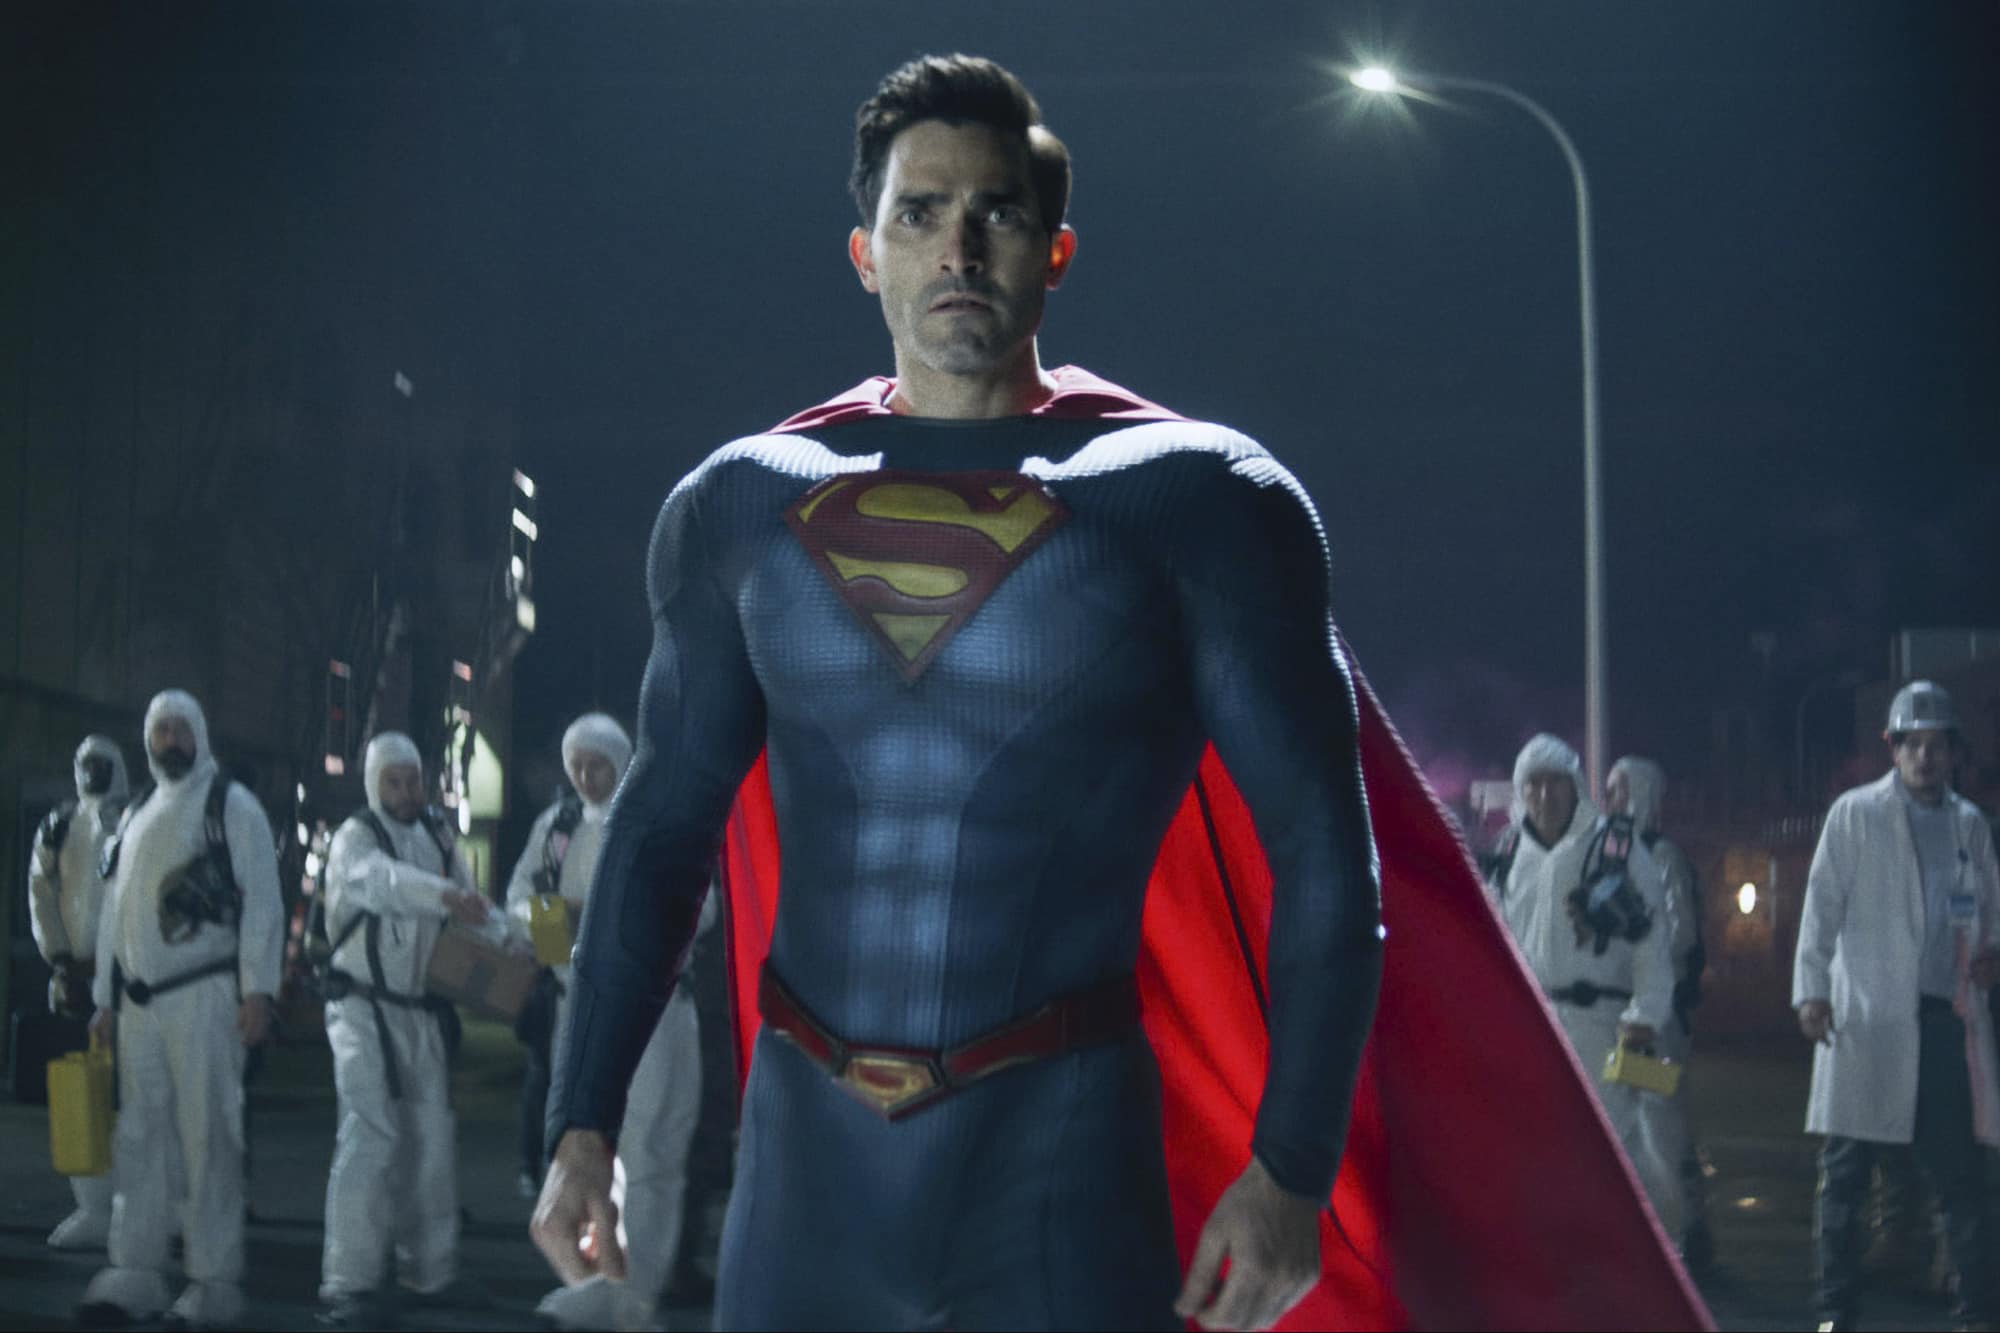 Superman & Lois Season 3 Episode 3 Release Date, Watch Online, Preview, Spoilers, and More - Tyler Hoechlin as Clark Kent aka Superman